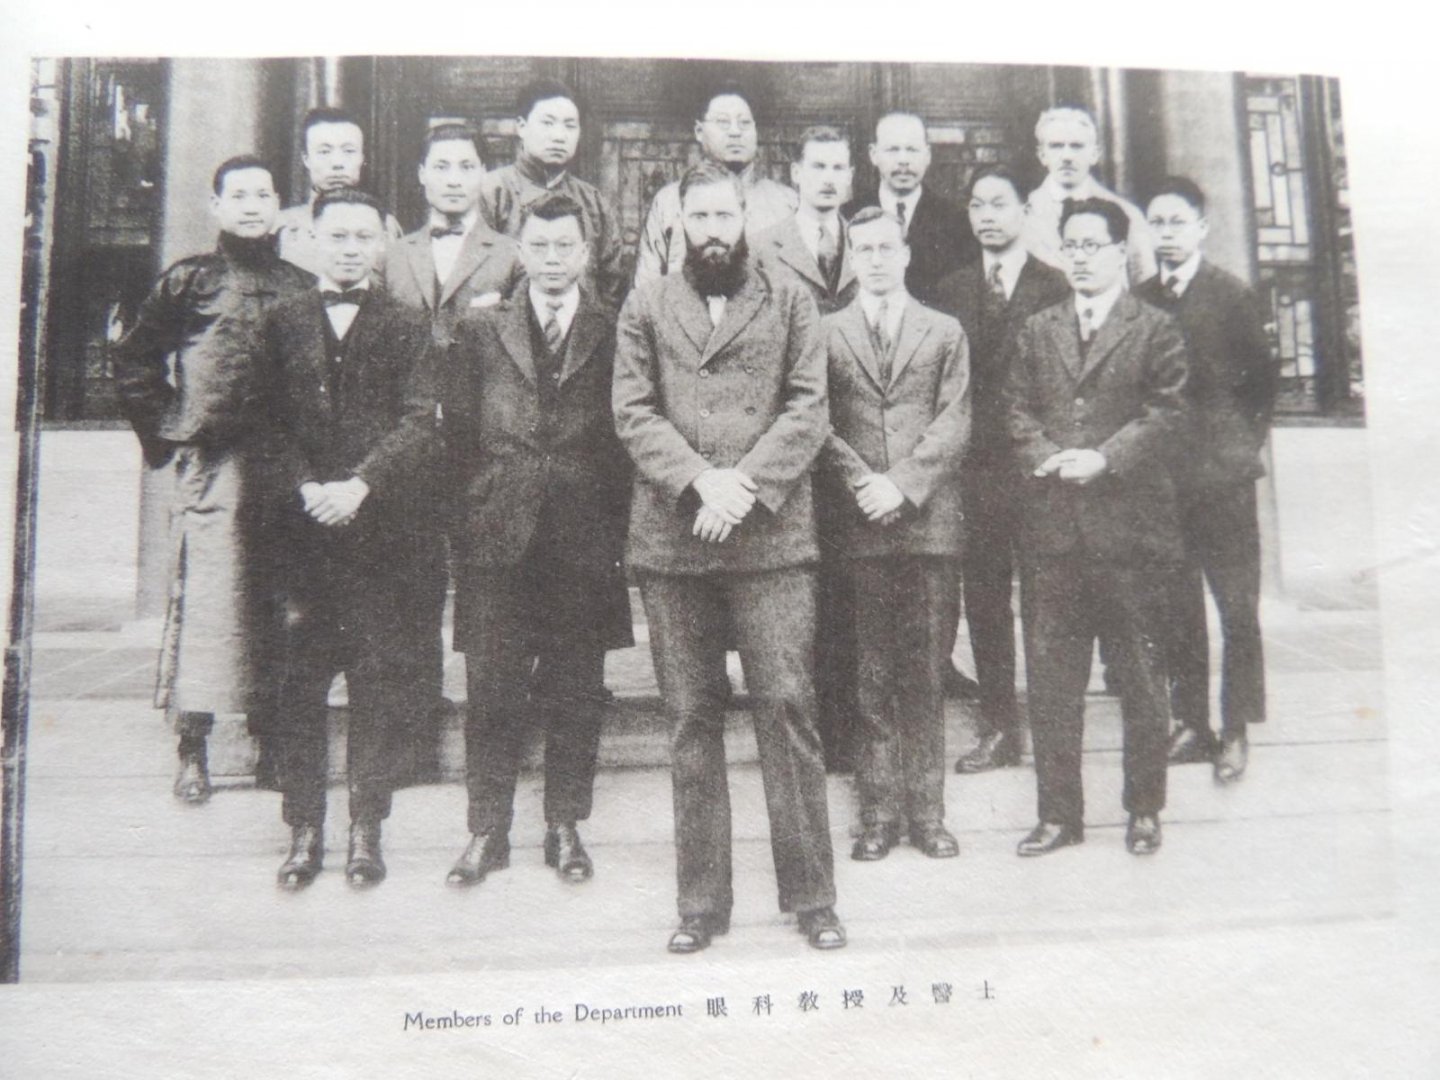 students of the Peking union Medical College Student Association - HOUGHTON,  LIANG,  HAWKINS,  ROCKEFELLER - Unison 1924